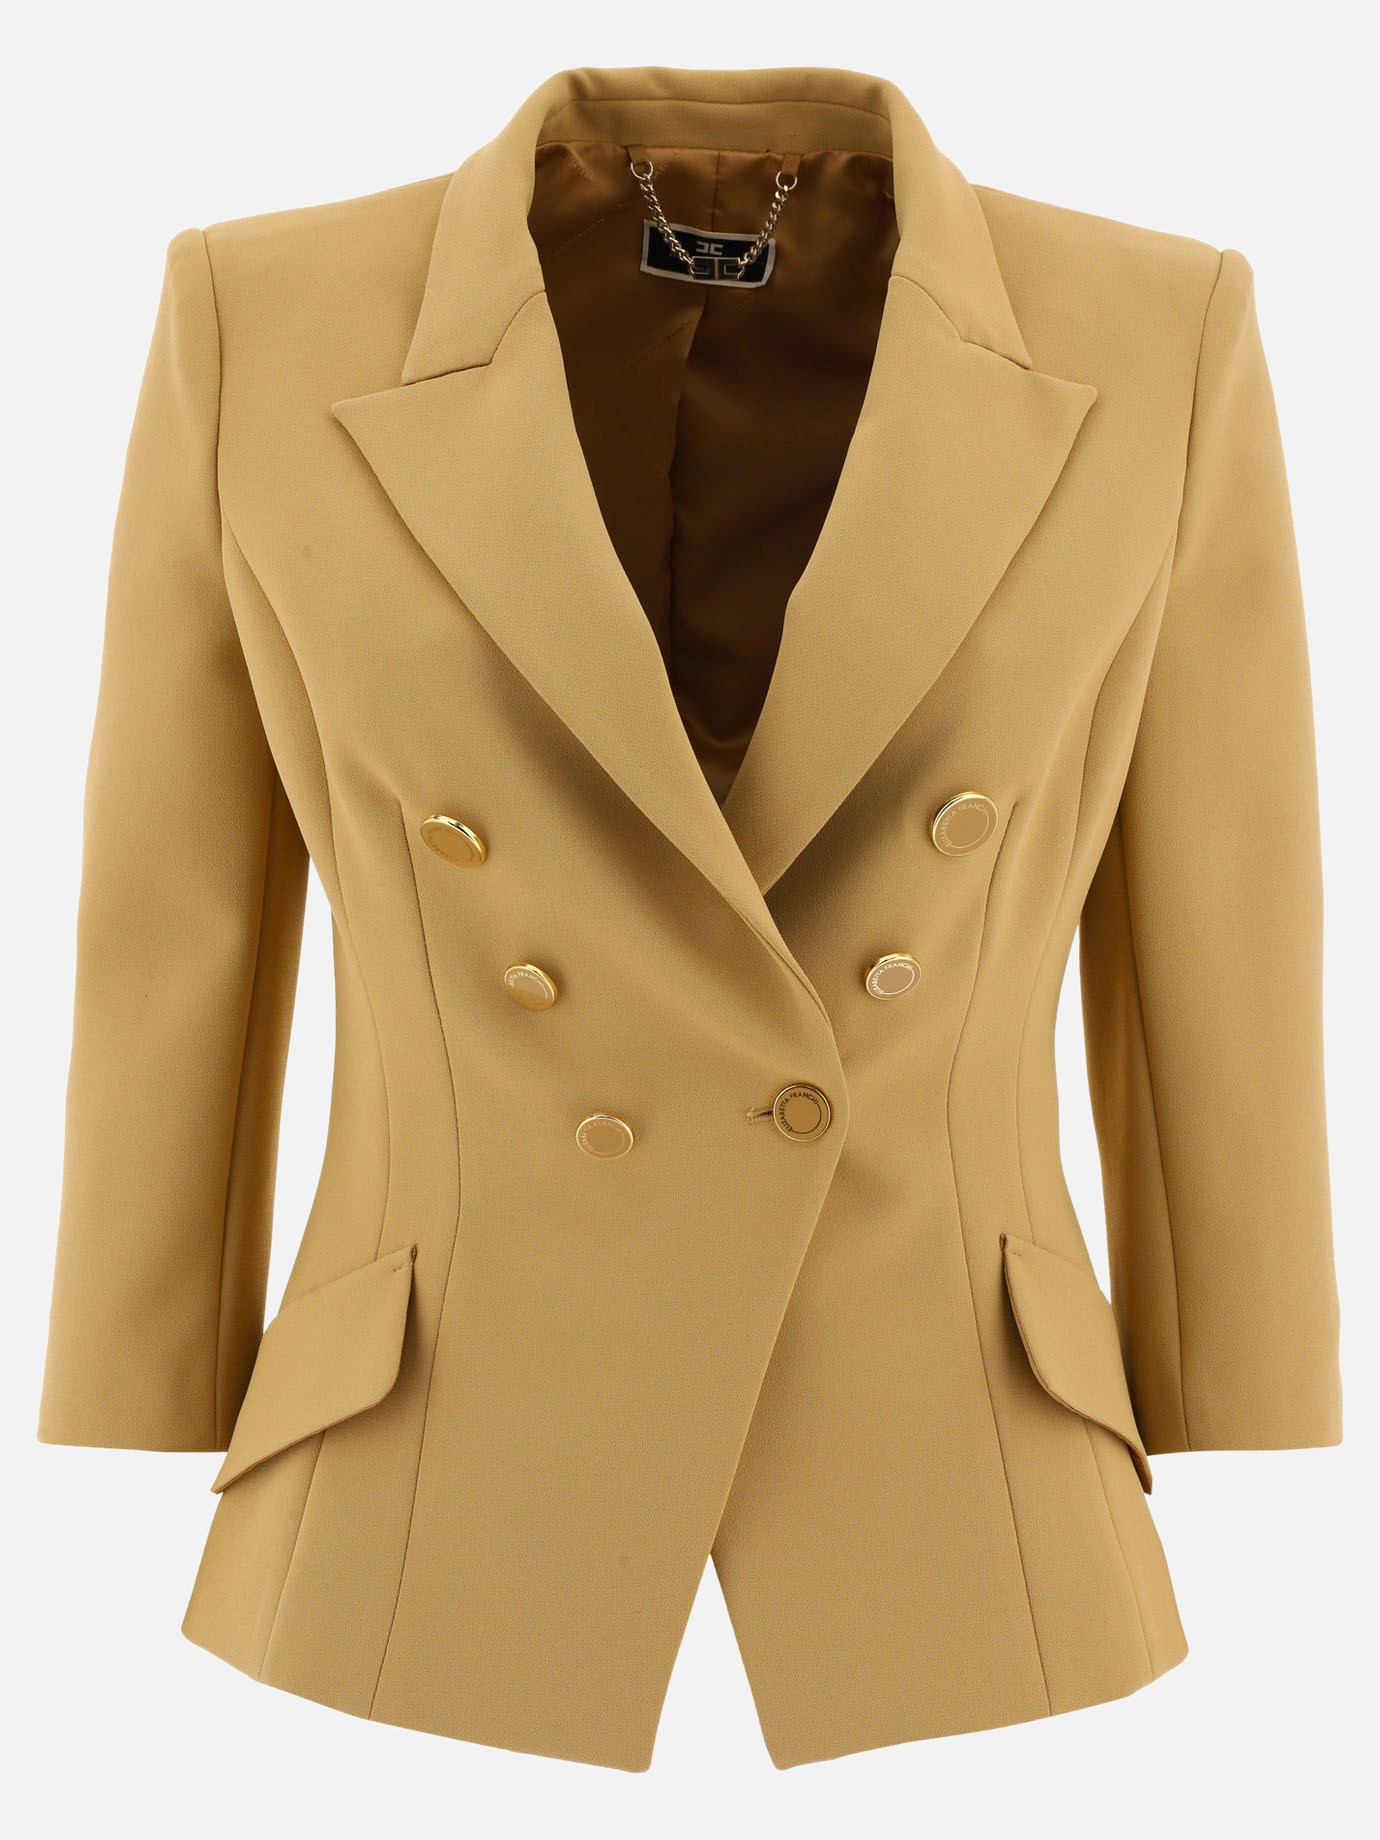 Double-breasted blazer with gold buttonsby Elisabetta Franchi - 3